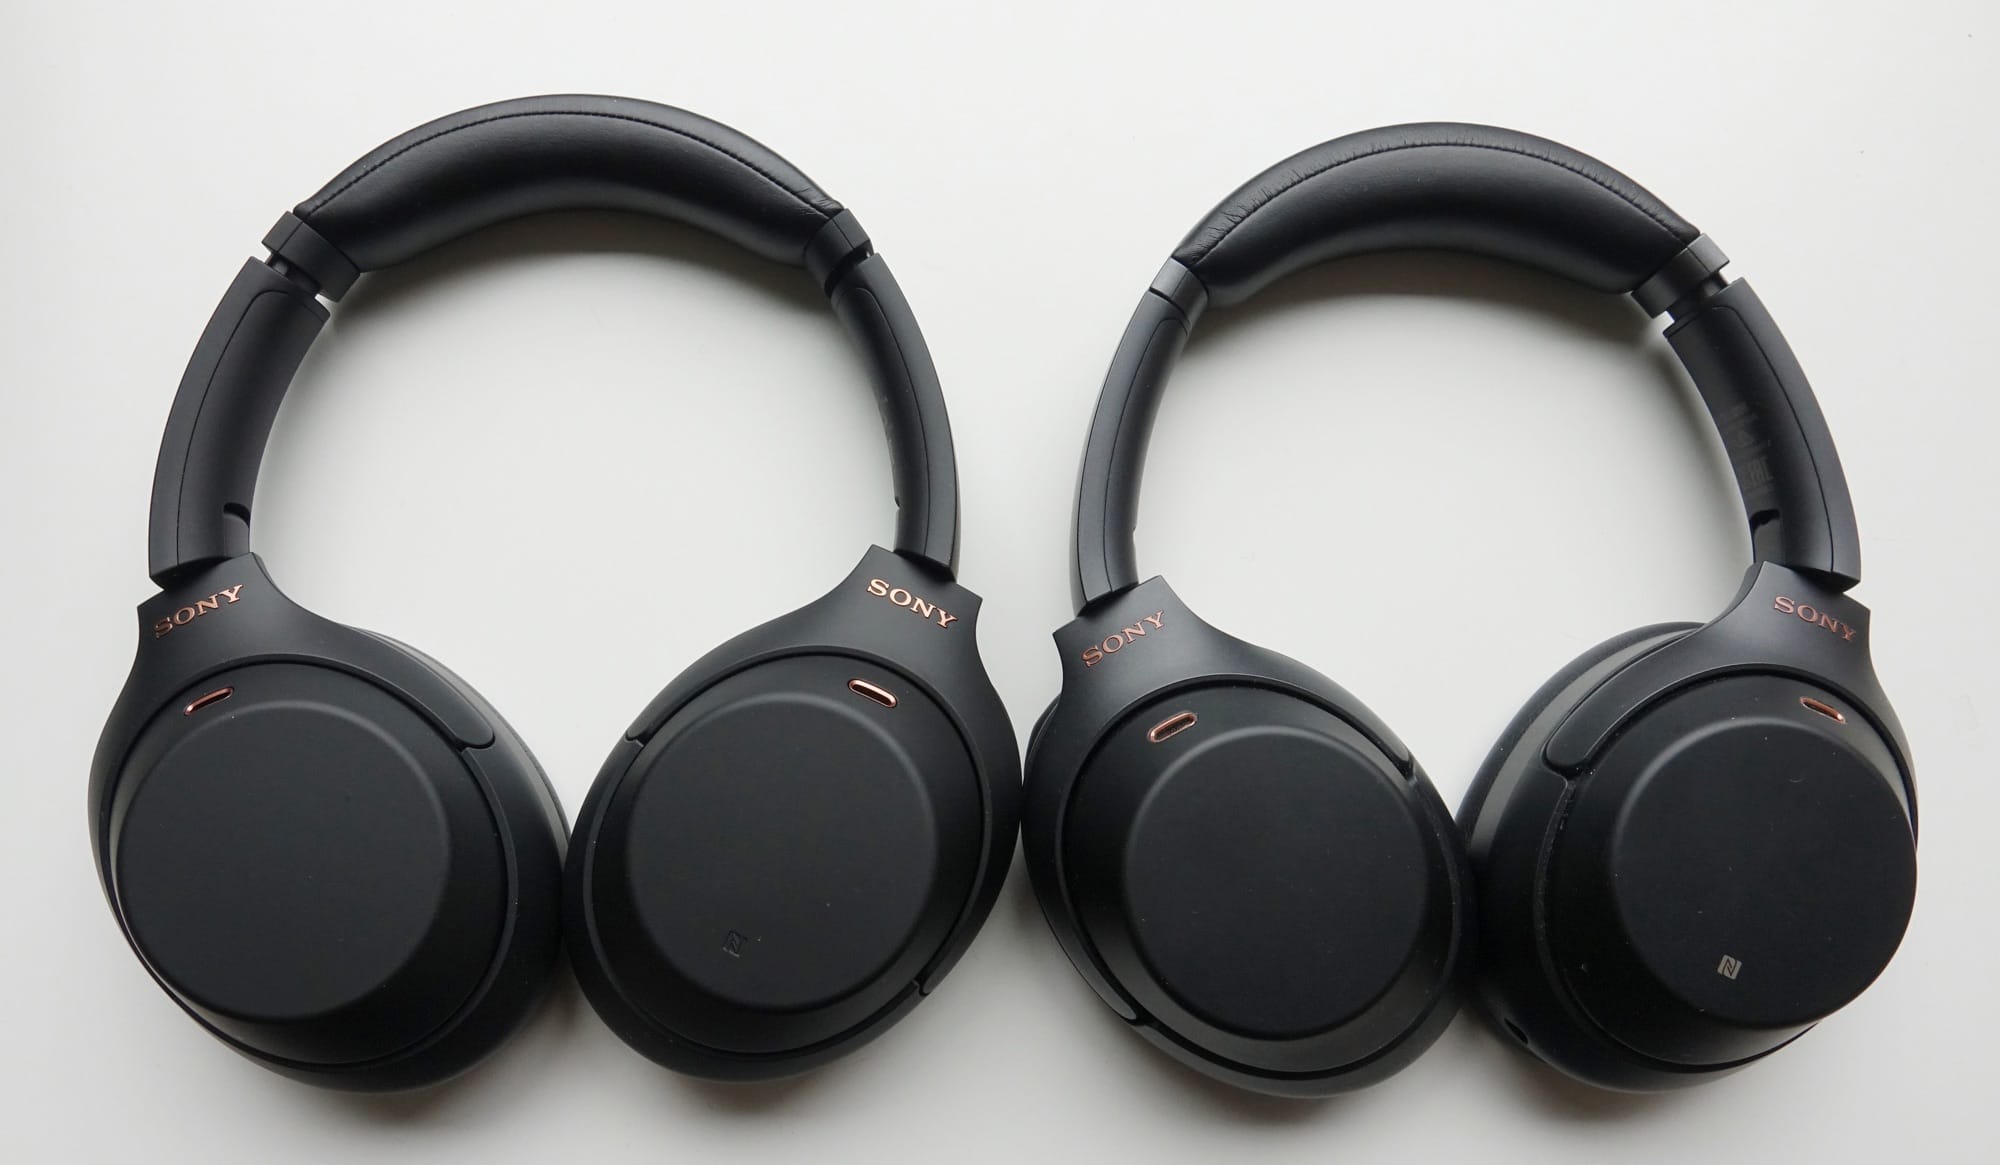 Headphones compared: the Sony WH-1000XM4 (left) vs the Sony WH-1000XM3 (right)